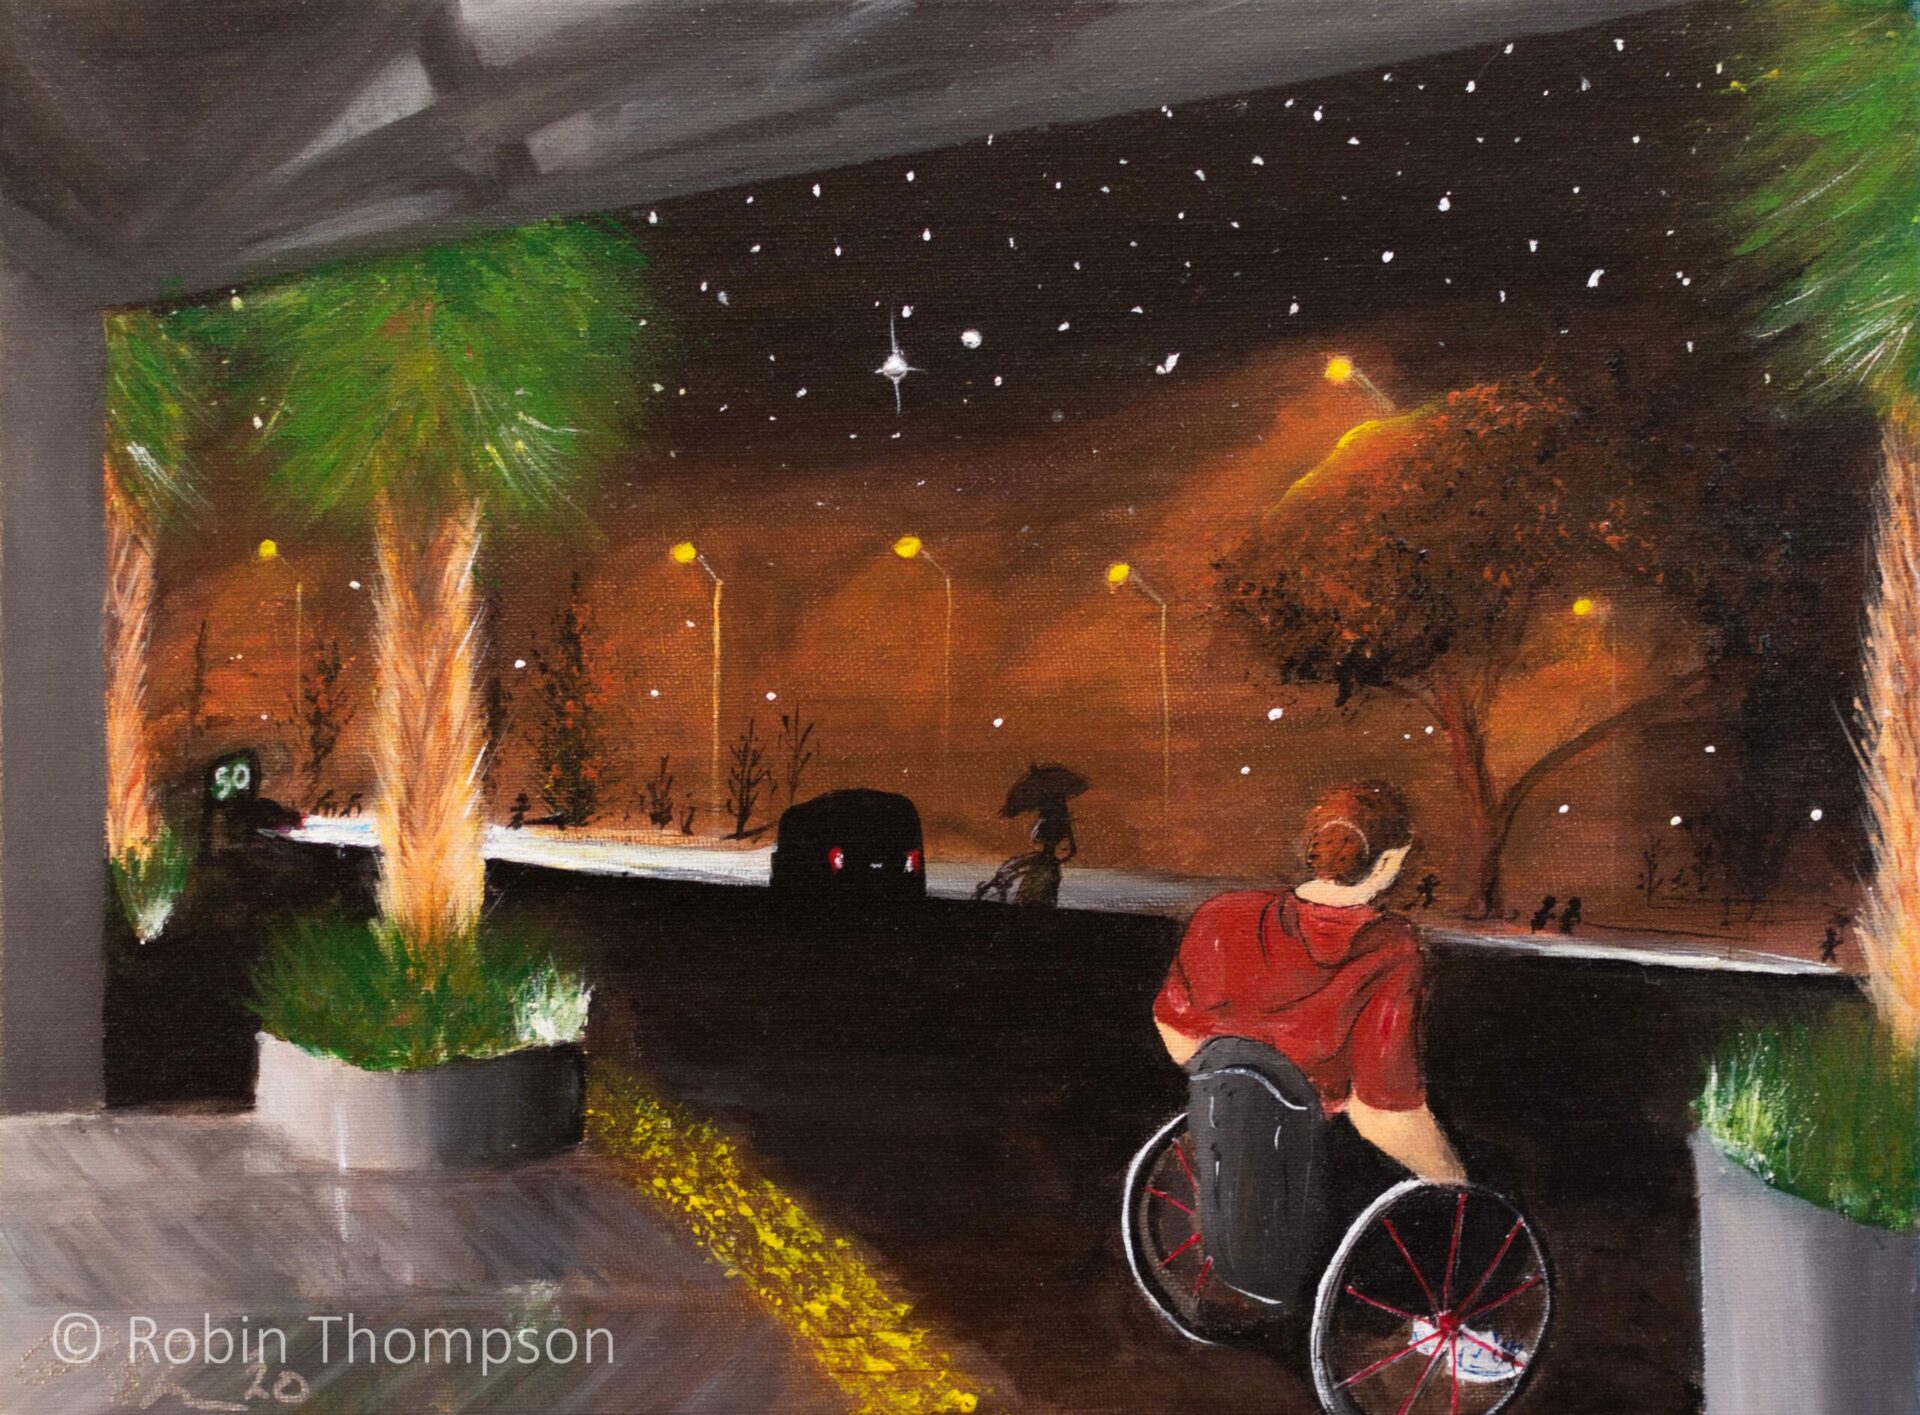 An acrylic painting scene showing a man in a wheelchair looking out from under a building entrance, towards a rainy night. In the background are cars, passers-by and streetlights, with browns and blacks dominating. The background appears clouded in fog, but stars can be seen near the top of the painting.